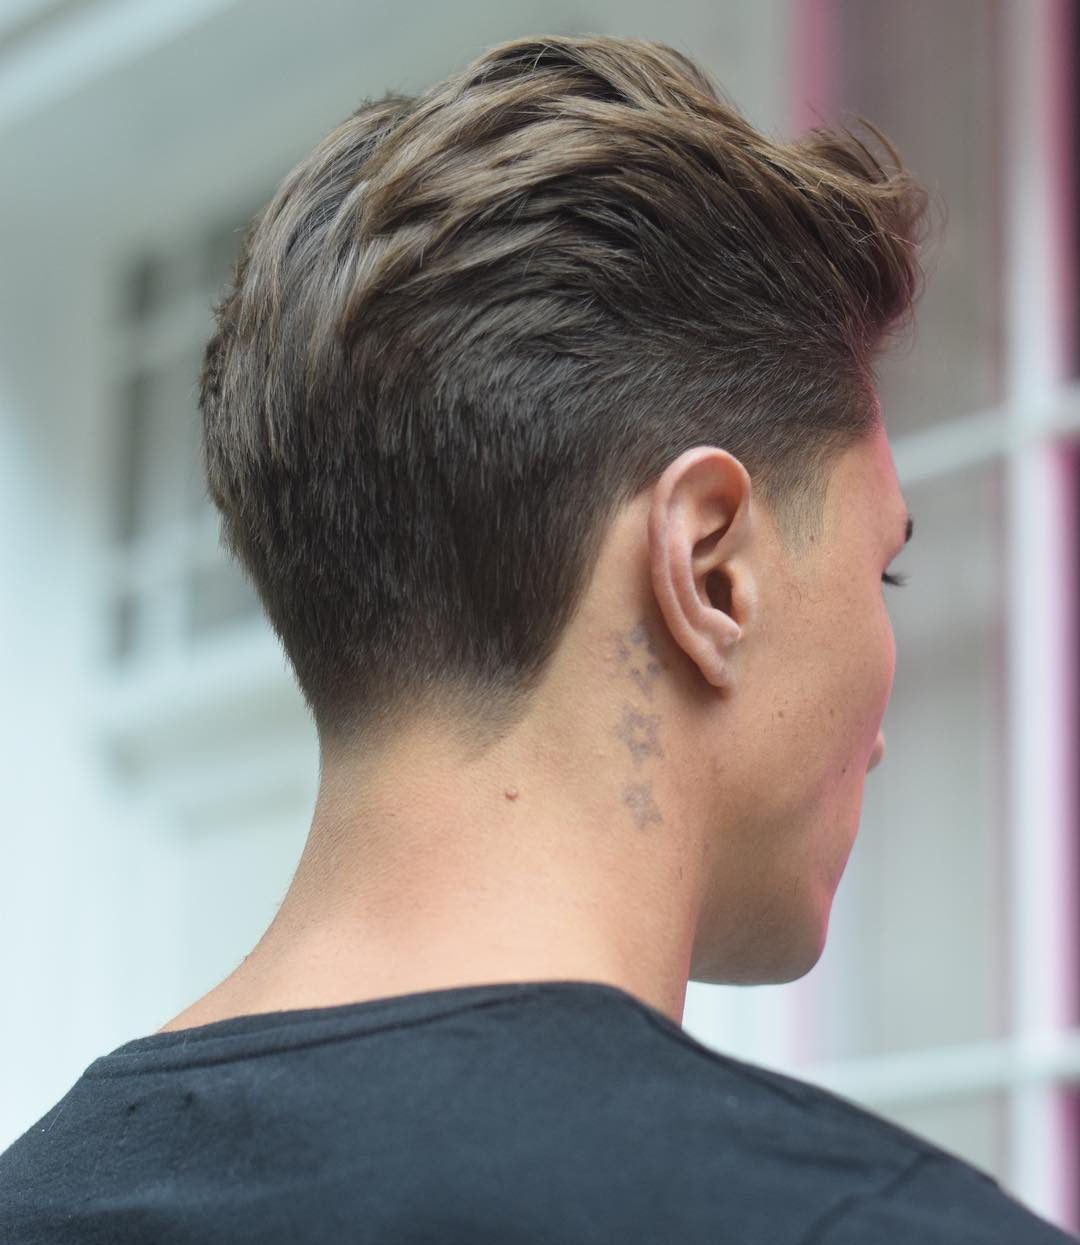 European Haircut Trends For Men (Super Cool Styles)